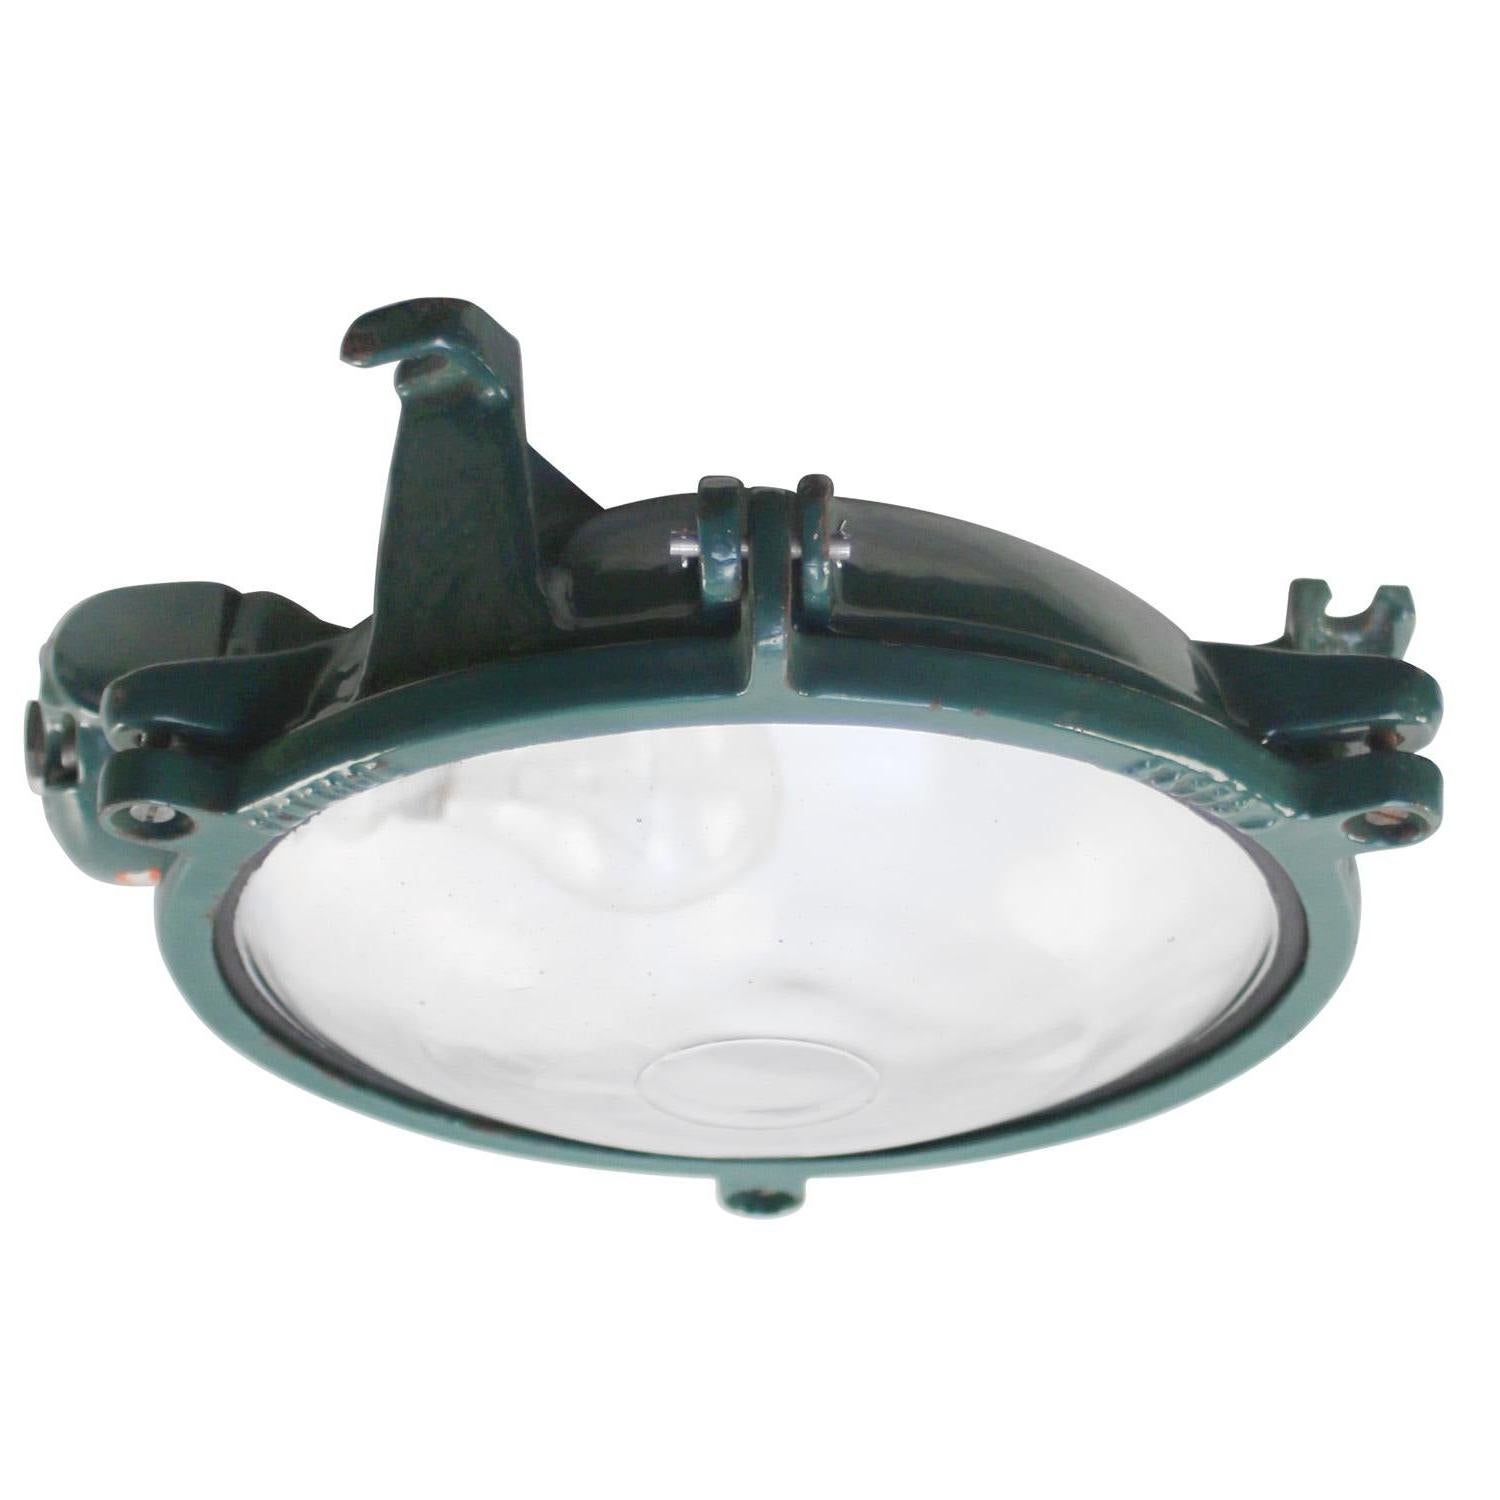 French Industrial wall / ceiling lamp by Sammode, France, model 547T1A
Green cast iron with clear glass.

Weight : 6.40 kg / 14.1 lb

B22 bulb holder

Priced per individual item. All lamps have been made suitable by international standards for